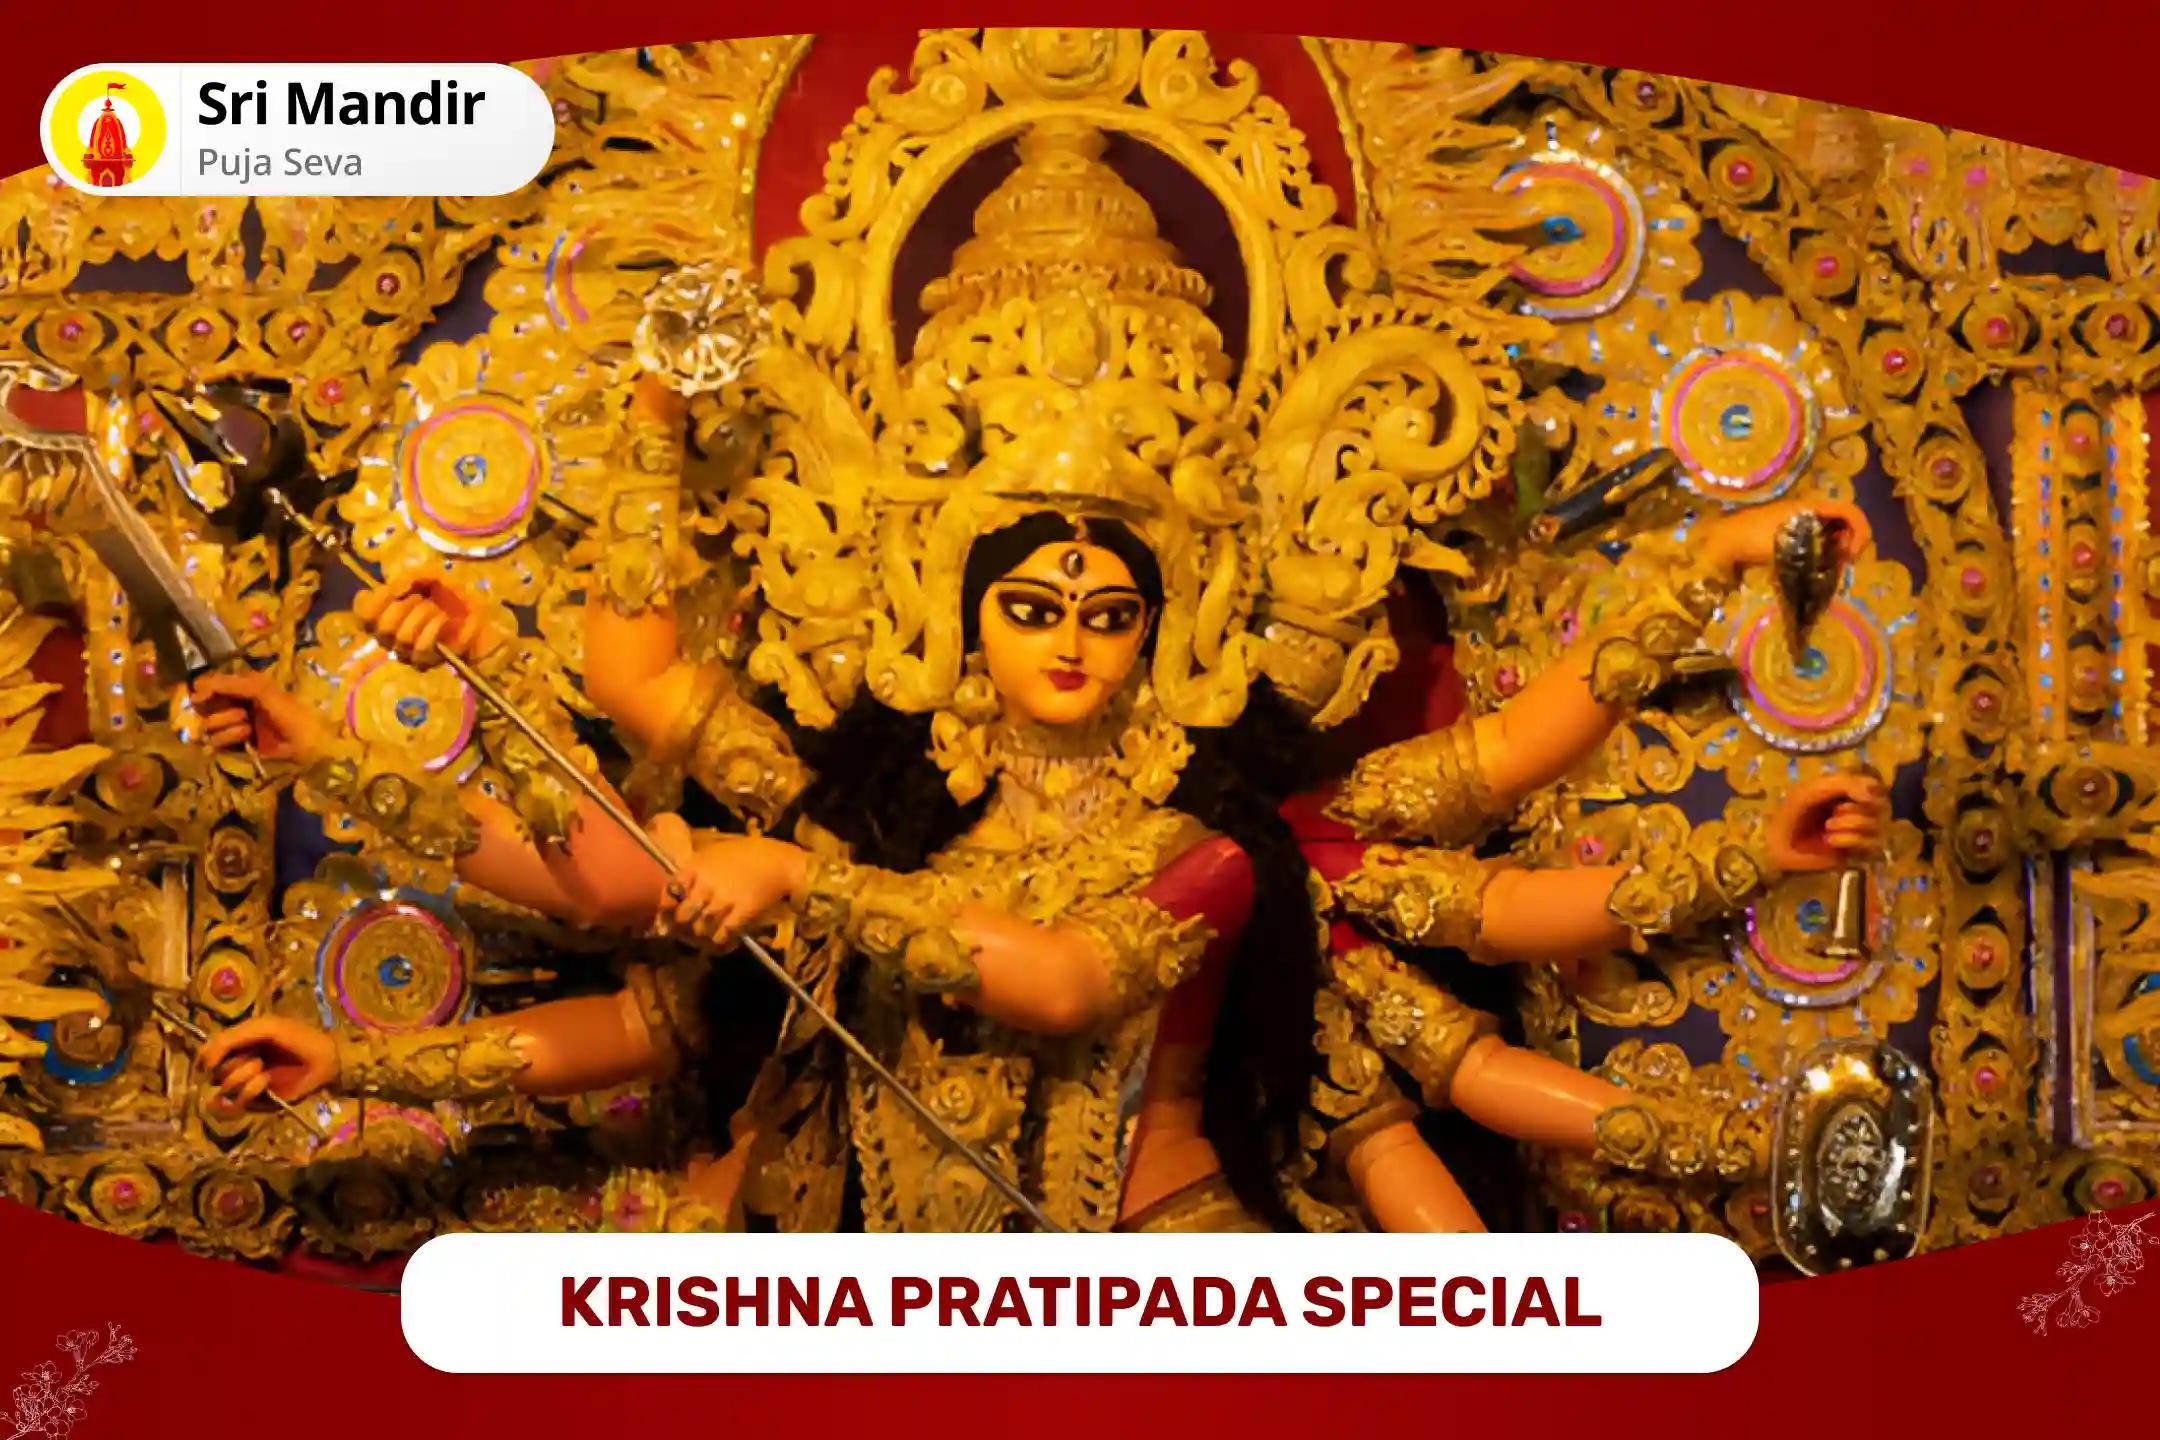 Krishna Pratipada Special 1008 Maa Durga Mantra jaap and Yagya for Attaining Fearlessness and Material Well-Being